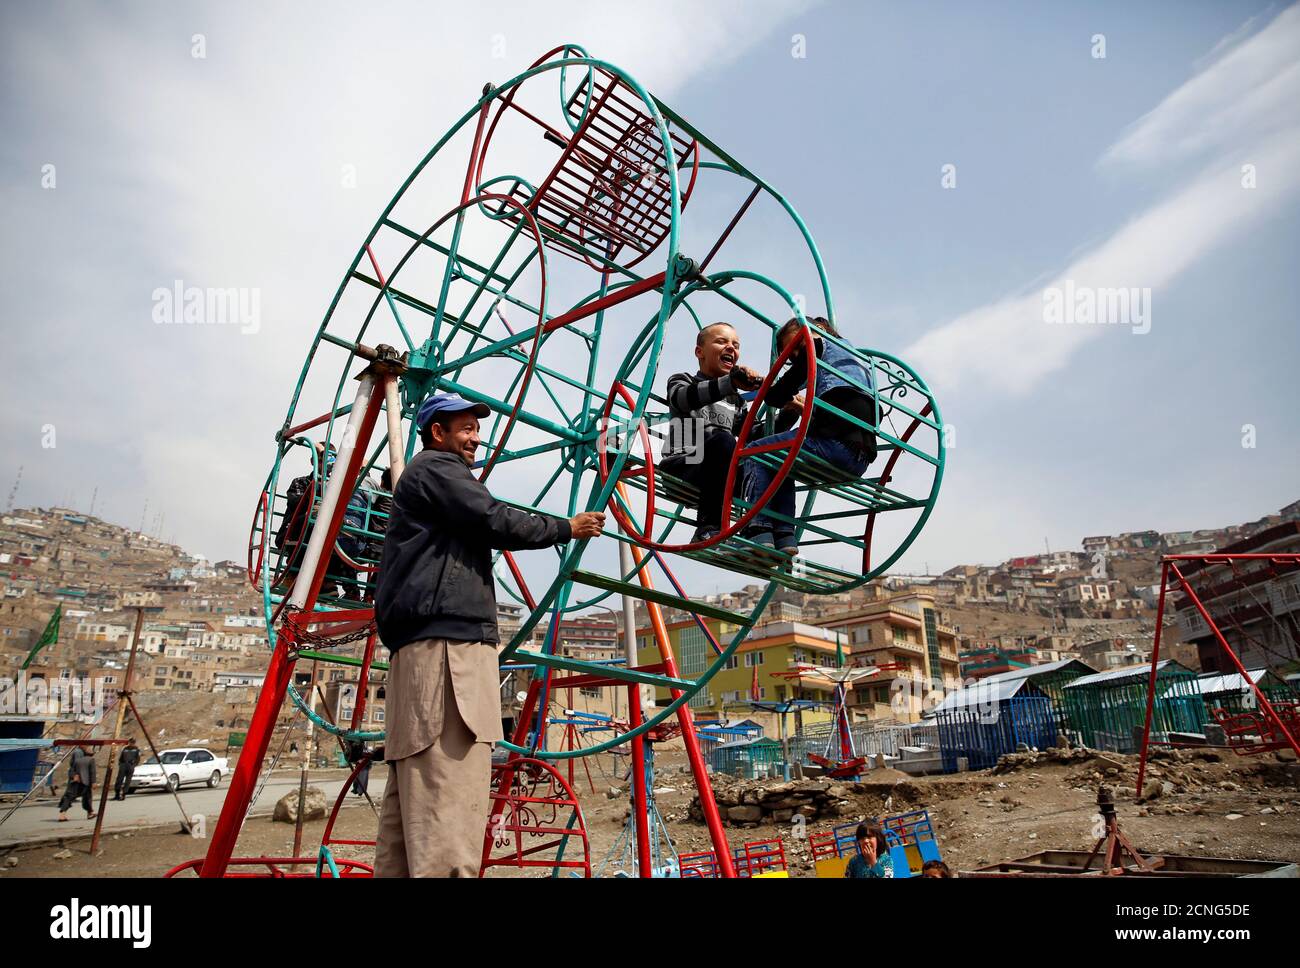 Children enjoy a manually operated ferris wheel in Kabul, Afghanistan March 20, 2018. REUTERS/Mohammad Ismail Stock Photo